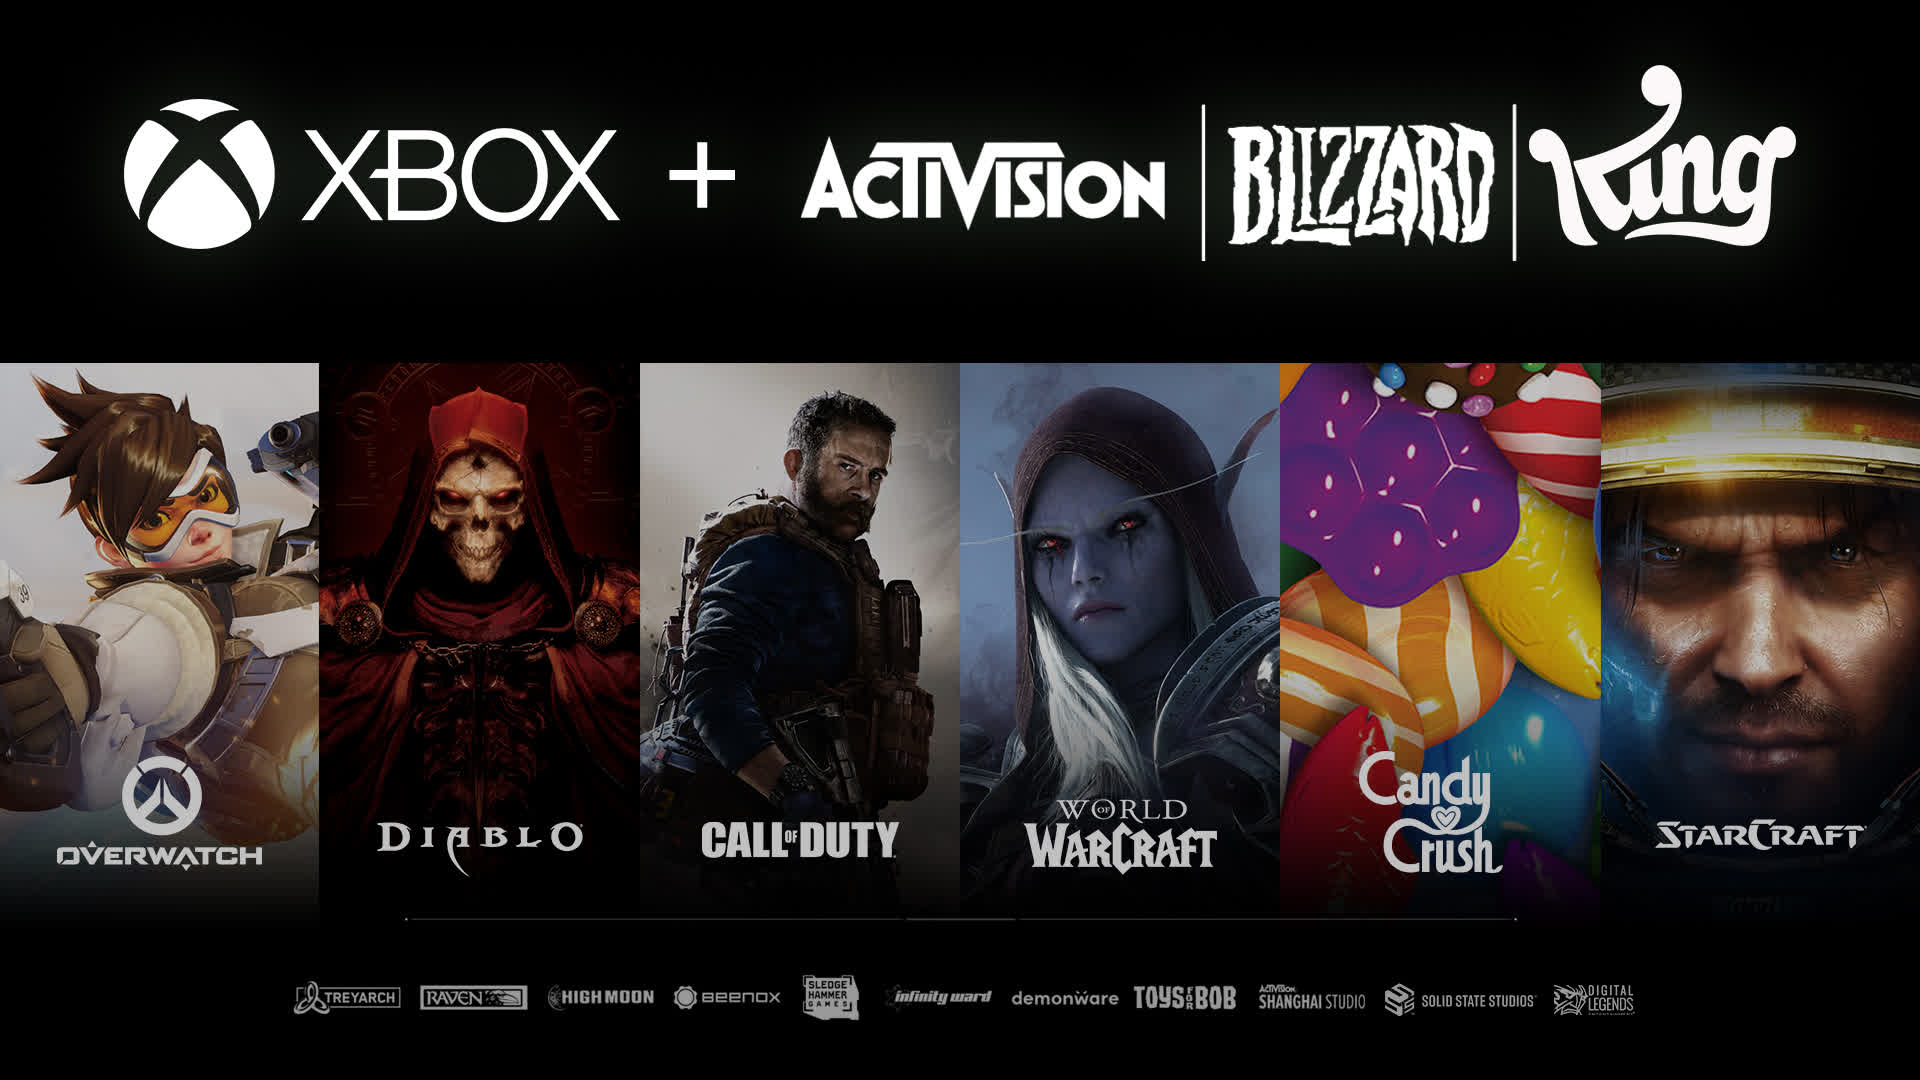 Microsoft started acquisition talks with Activision Blizzard 3 days after harassment allegations surfaced thumbnail